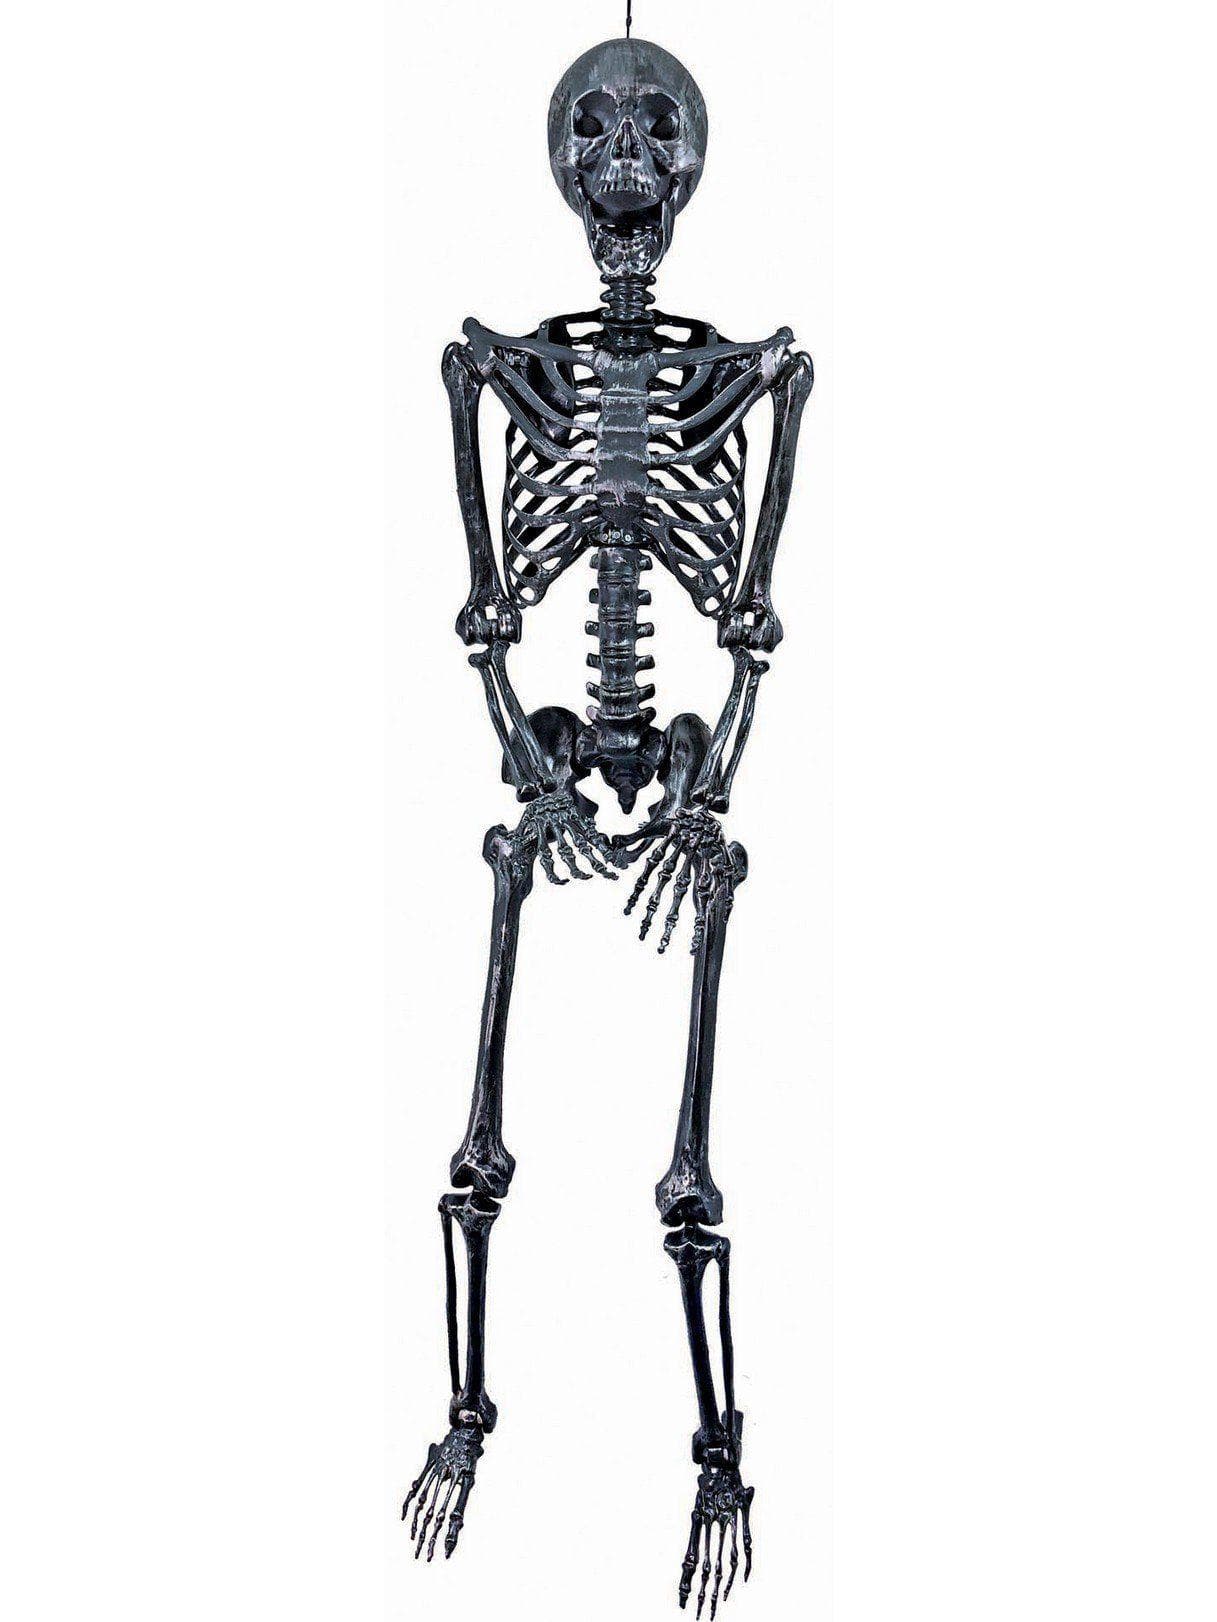 60" Posable Silver Skeleton - costumes.com